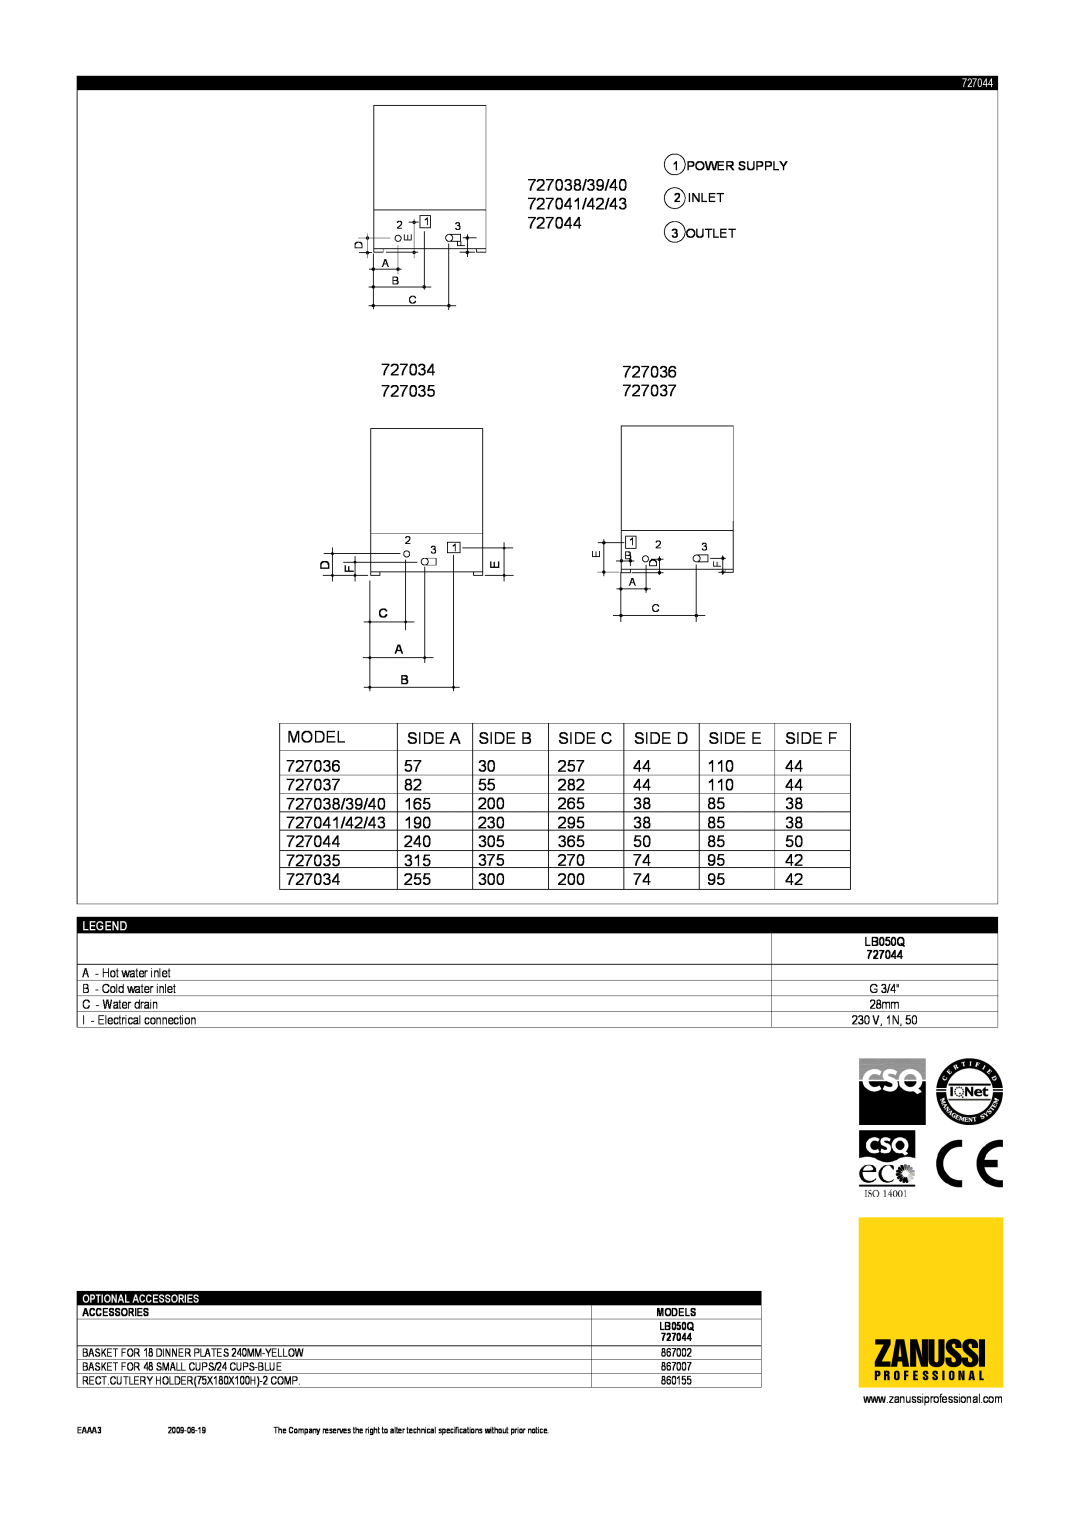 Zanussi LB050Q, 727044 Zanussi, A - Hot water inlet, B - Cold water inlet, C - Water drain, I - Electrical connection 